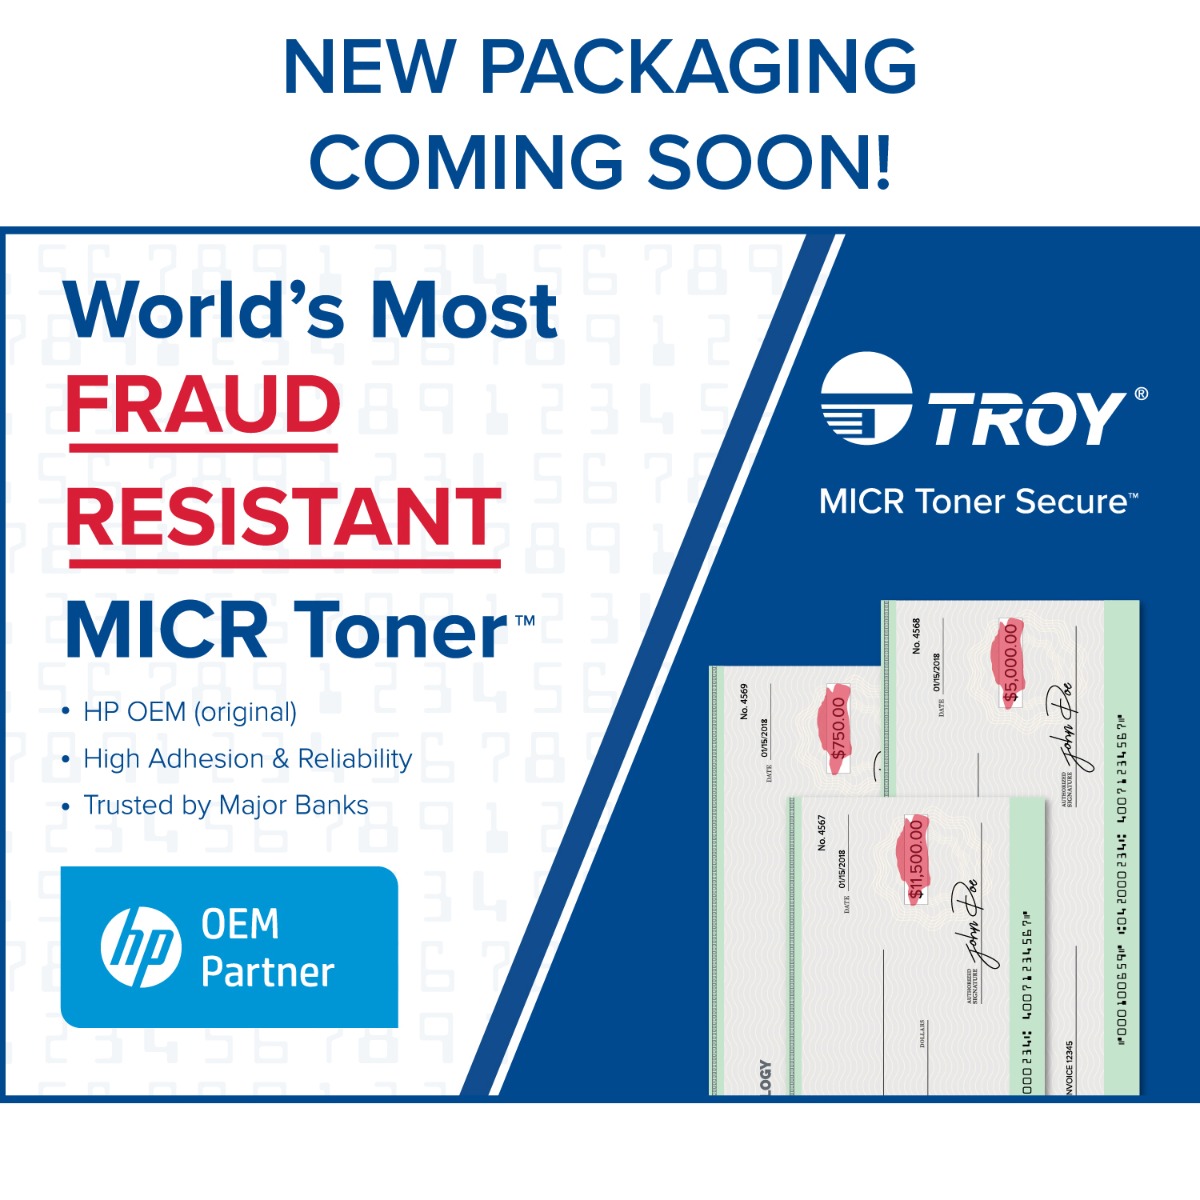 TROY Precision MICR Toner Secure Standard Yield Cartridge for Lexmark ST 9335/9340